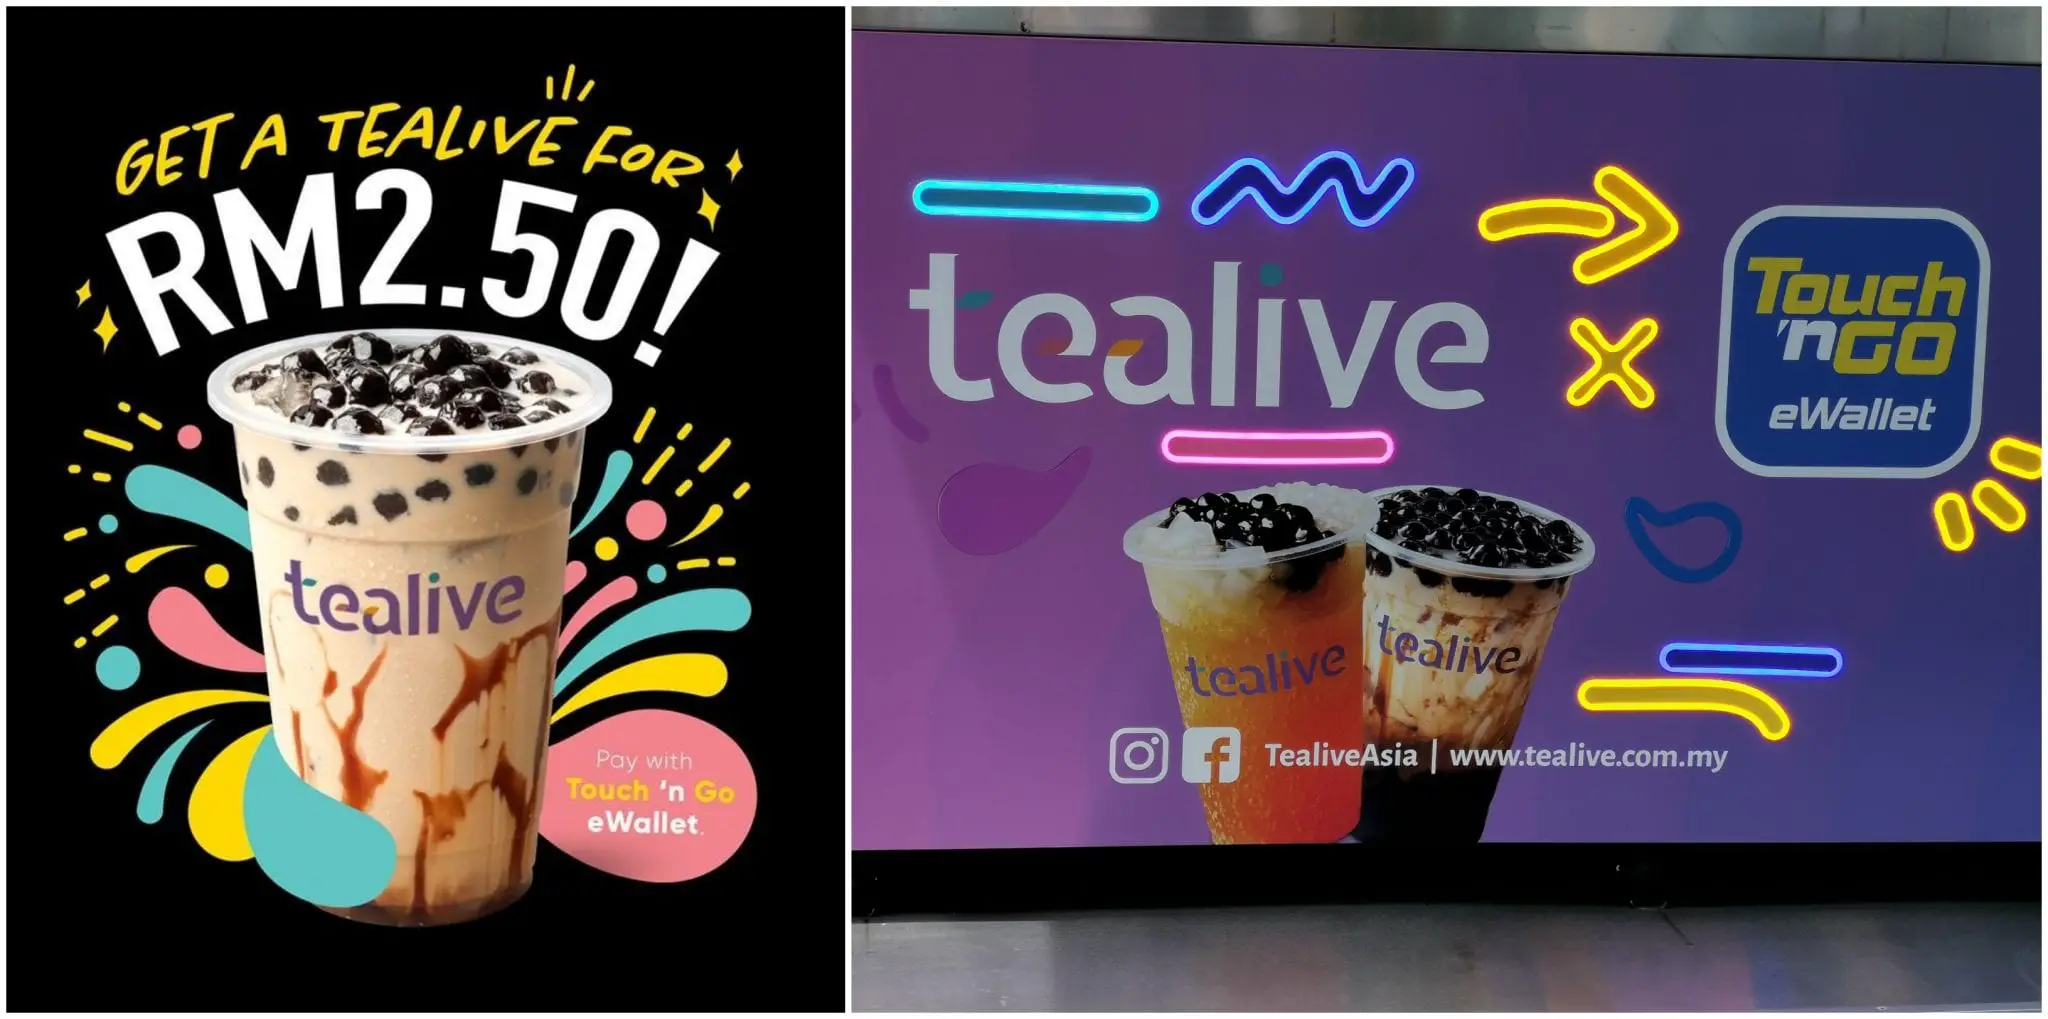 Tealive Is Having A Rm2 50 Promotion With Touch N Go Ewallet